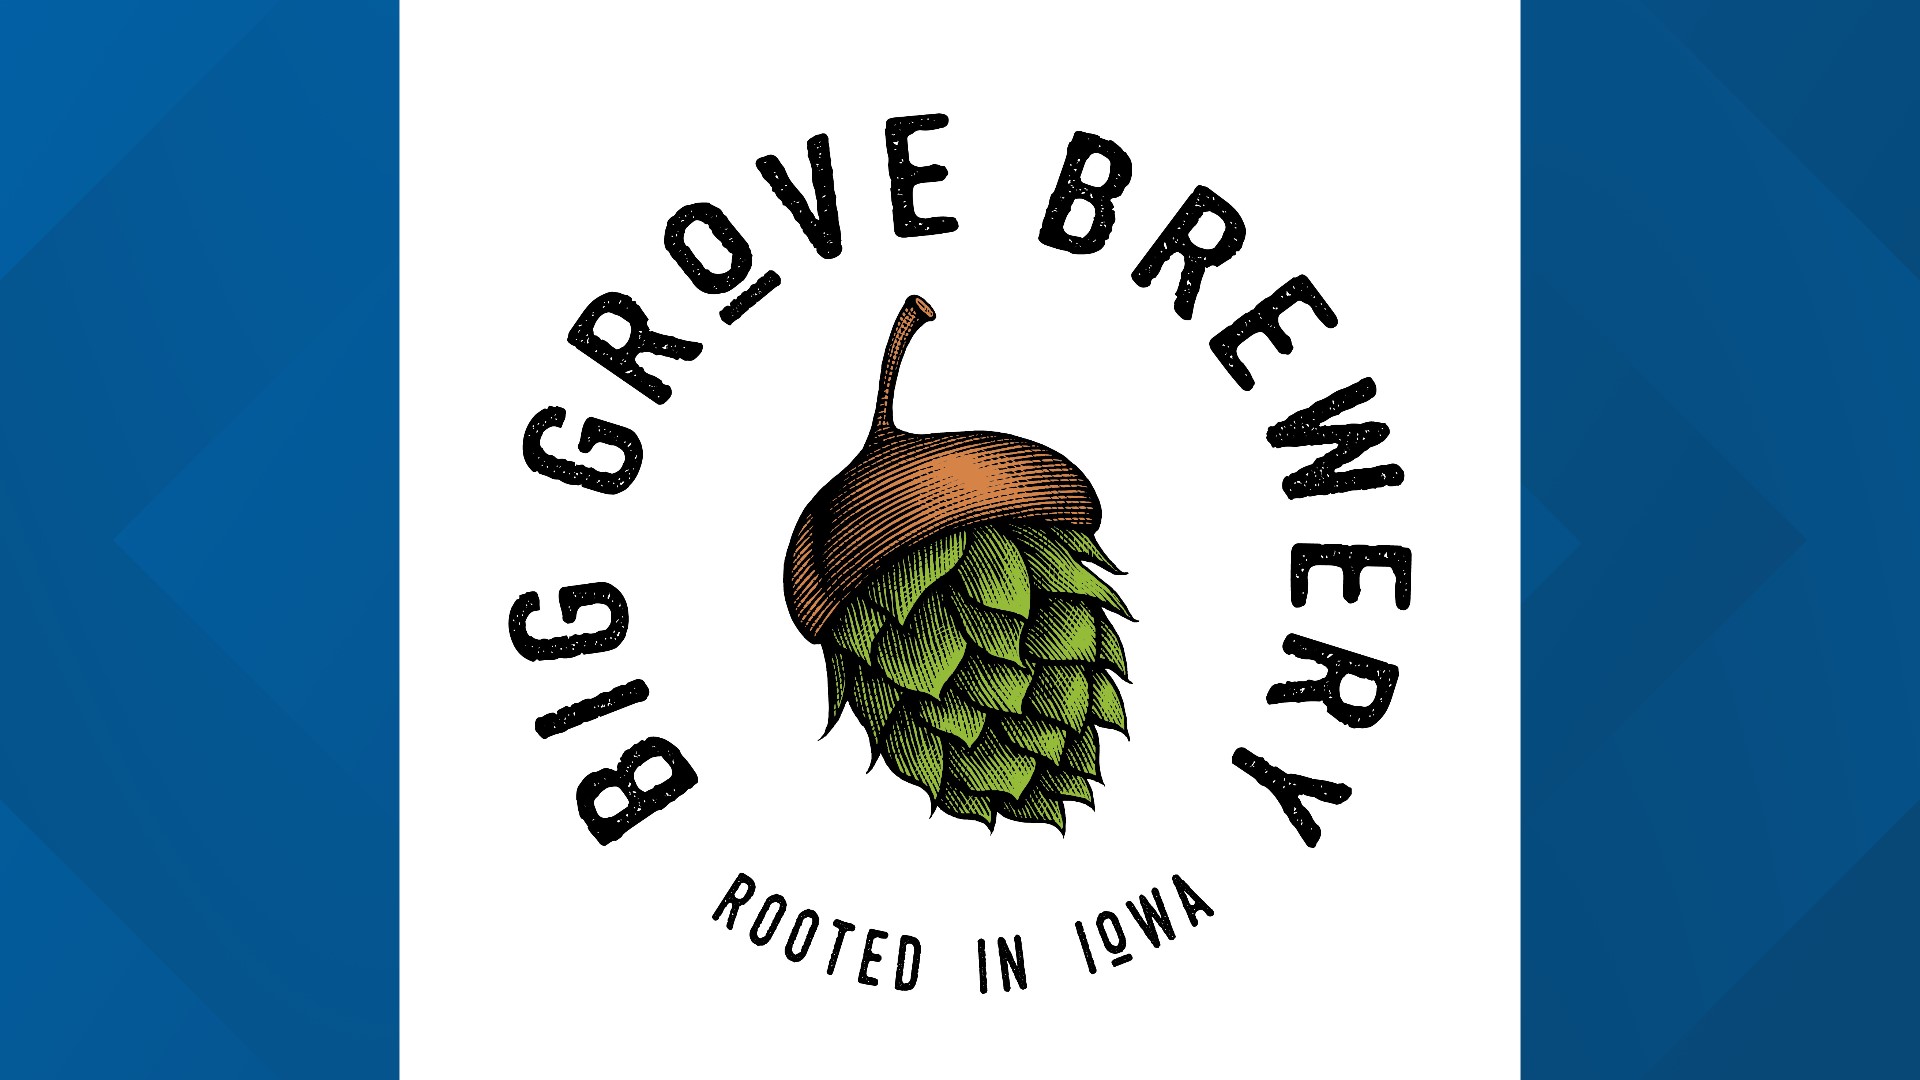 The "Brewed crew" is catching up with the owners of Big Grove Brewery as they launch their new location in Cedar Rapids.